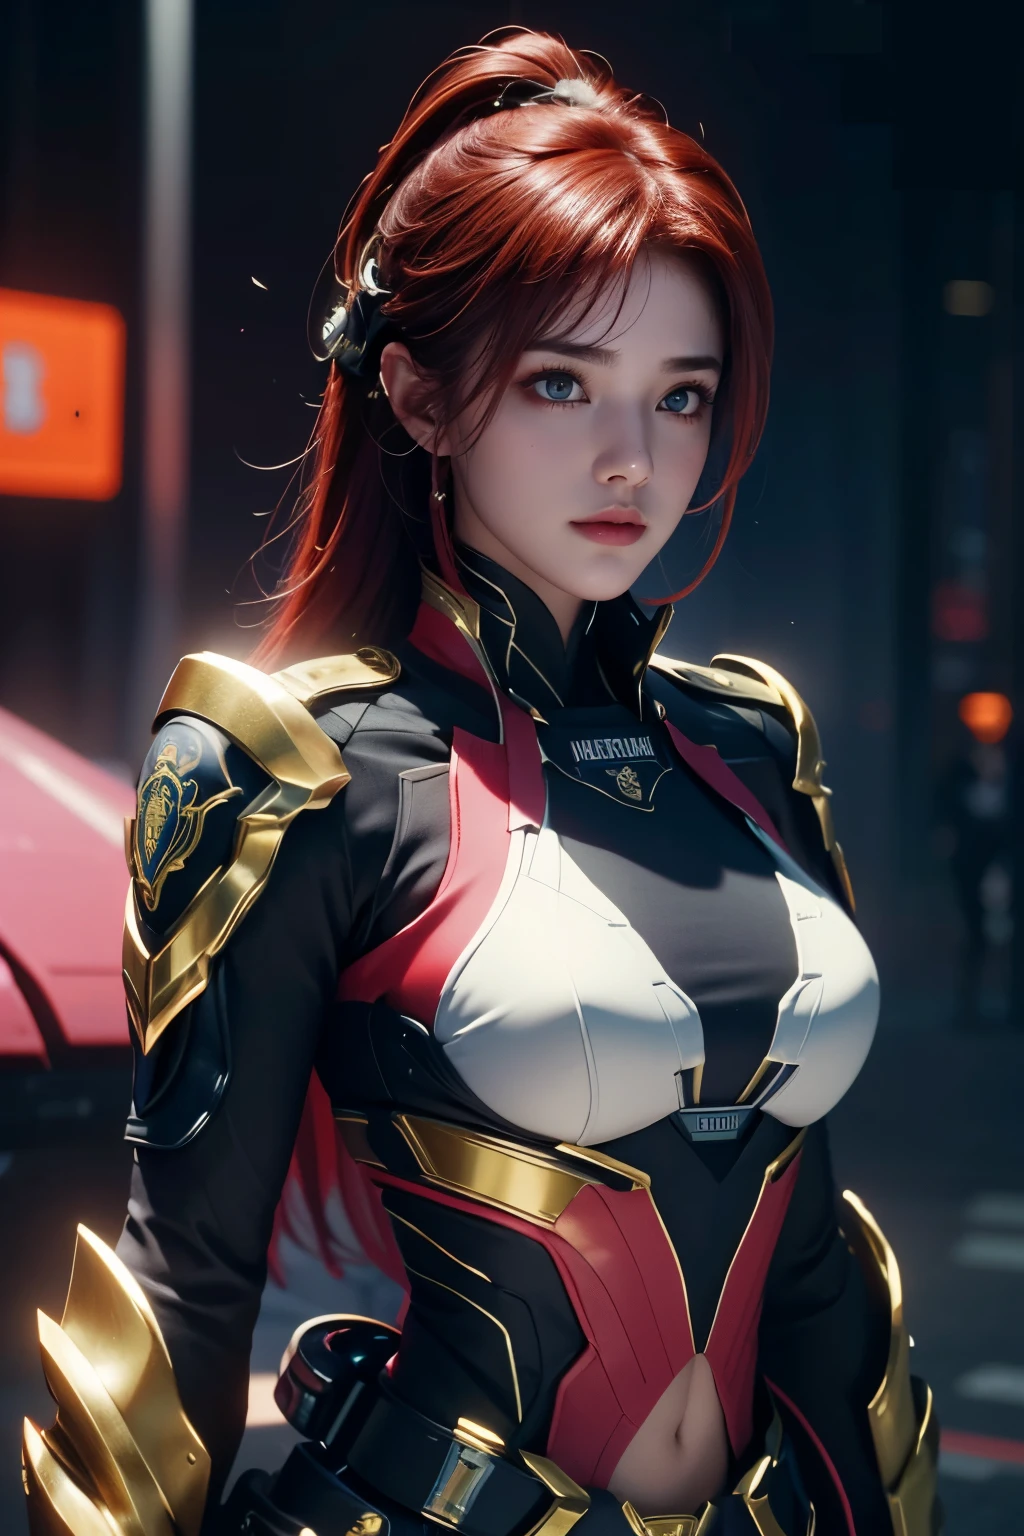 high high quality,A high resolution,masterpiece,8K,(Hyperrealistic photos),(Portrait),digital photography,(Reality:1.4),20-year-old girl,exquisite facial features,a purple eye,Red Eyeshadow,((Cyberpunk-style police officer)),Random hairstyles,(red tinted hair),Big breasts,Cleavage,(An open police uniform with a mix of sci-fi and realistic style,With an open chest,Combat uniforms,Openwork design,power armour,Metal shoulder pads,complex clothing patterns,Exquisite police badge),(Show navel),Keep your mouth shut,Frowning,ssmile,Cold and serious,extremely detailed expression,realistic detail,Light magic,Photo pose,oc render reflection texture